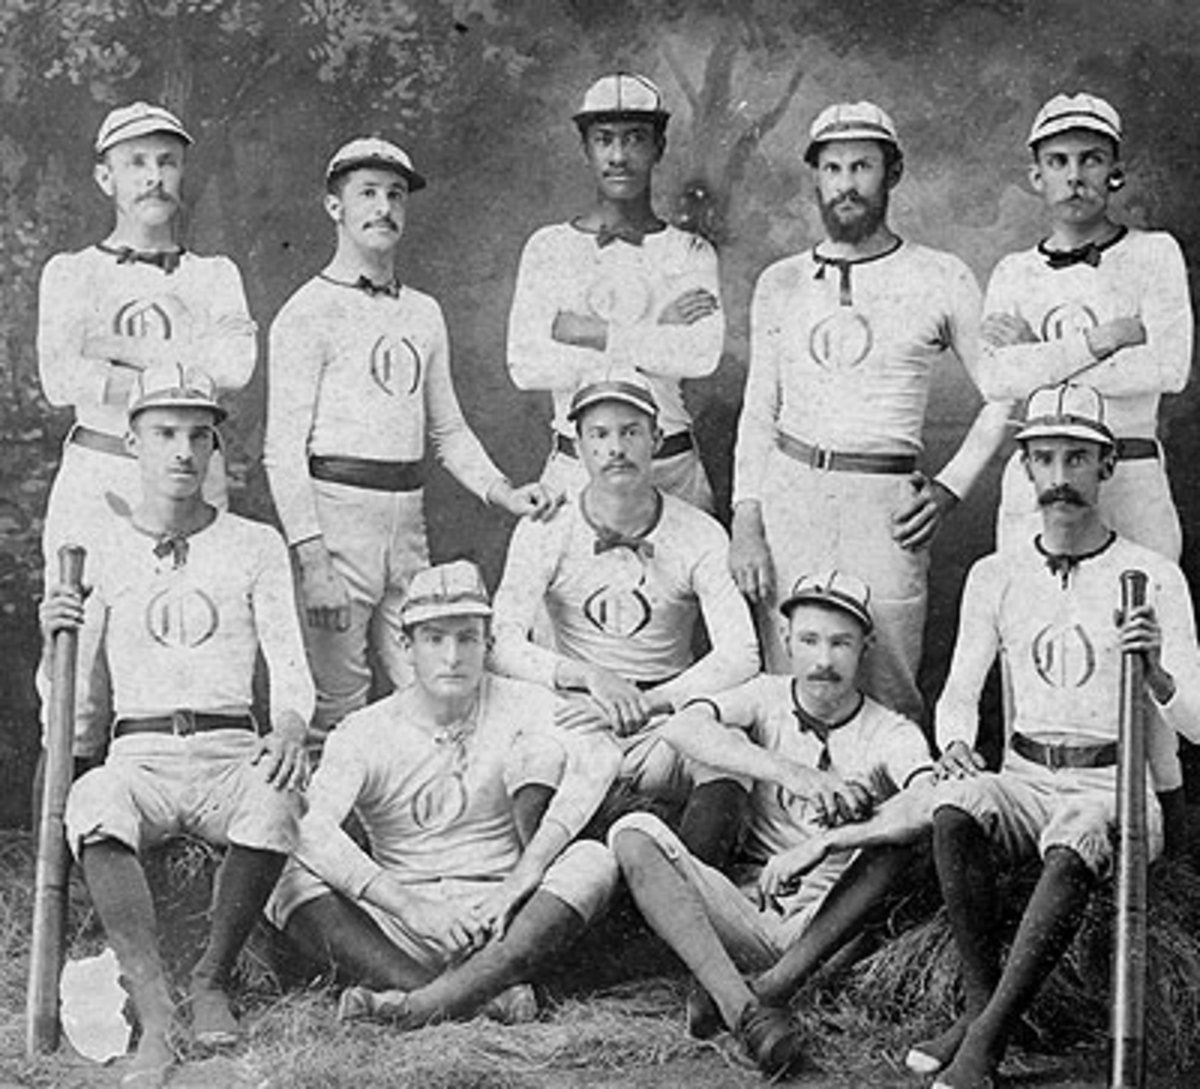 Since the 1870s baseball has grown considerably in popularity.  